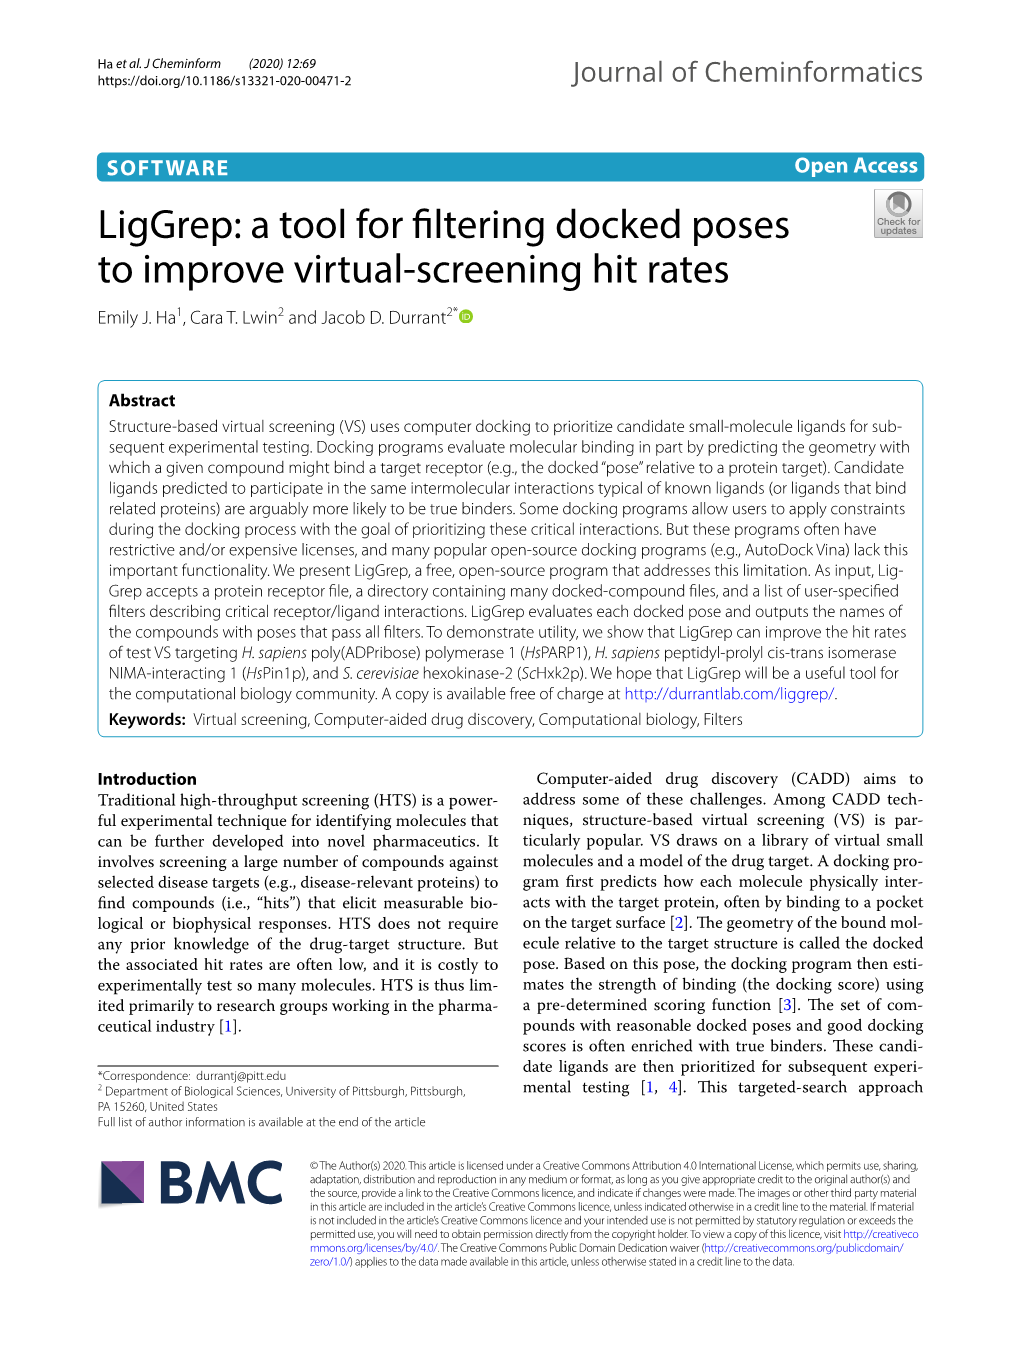 Liggrep: a Tool for Filtering Docked Poses to Improve Virtual-Screening